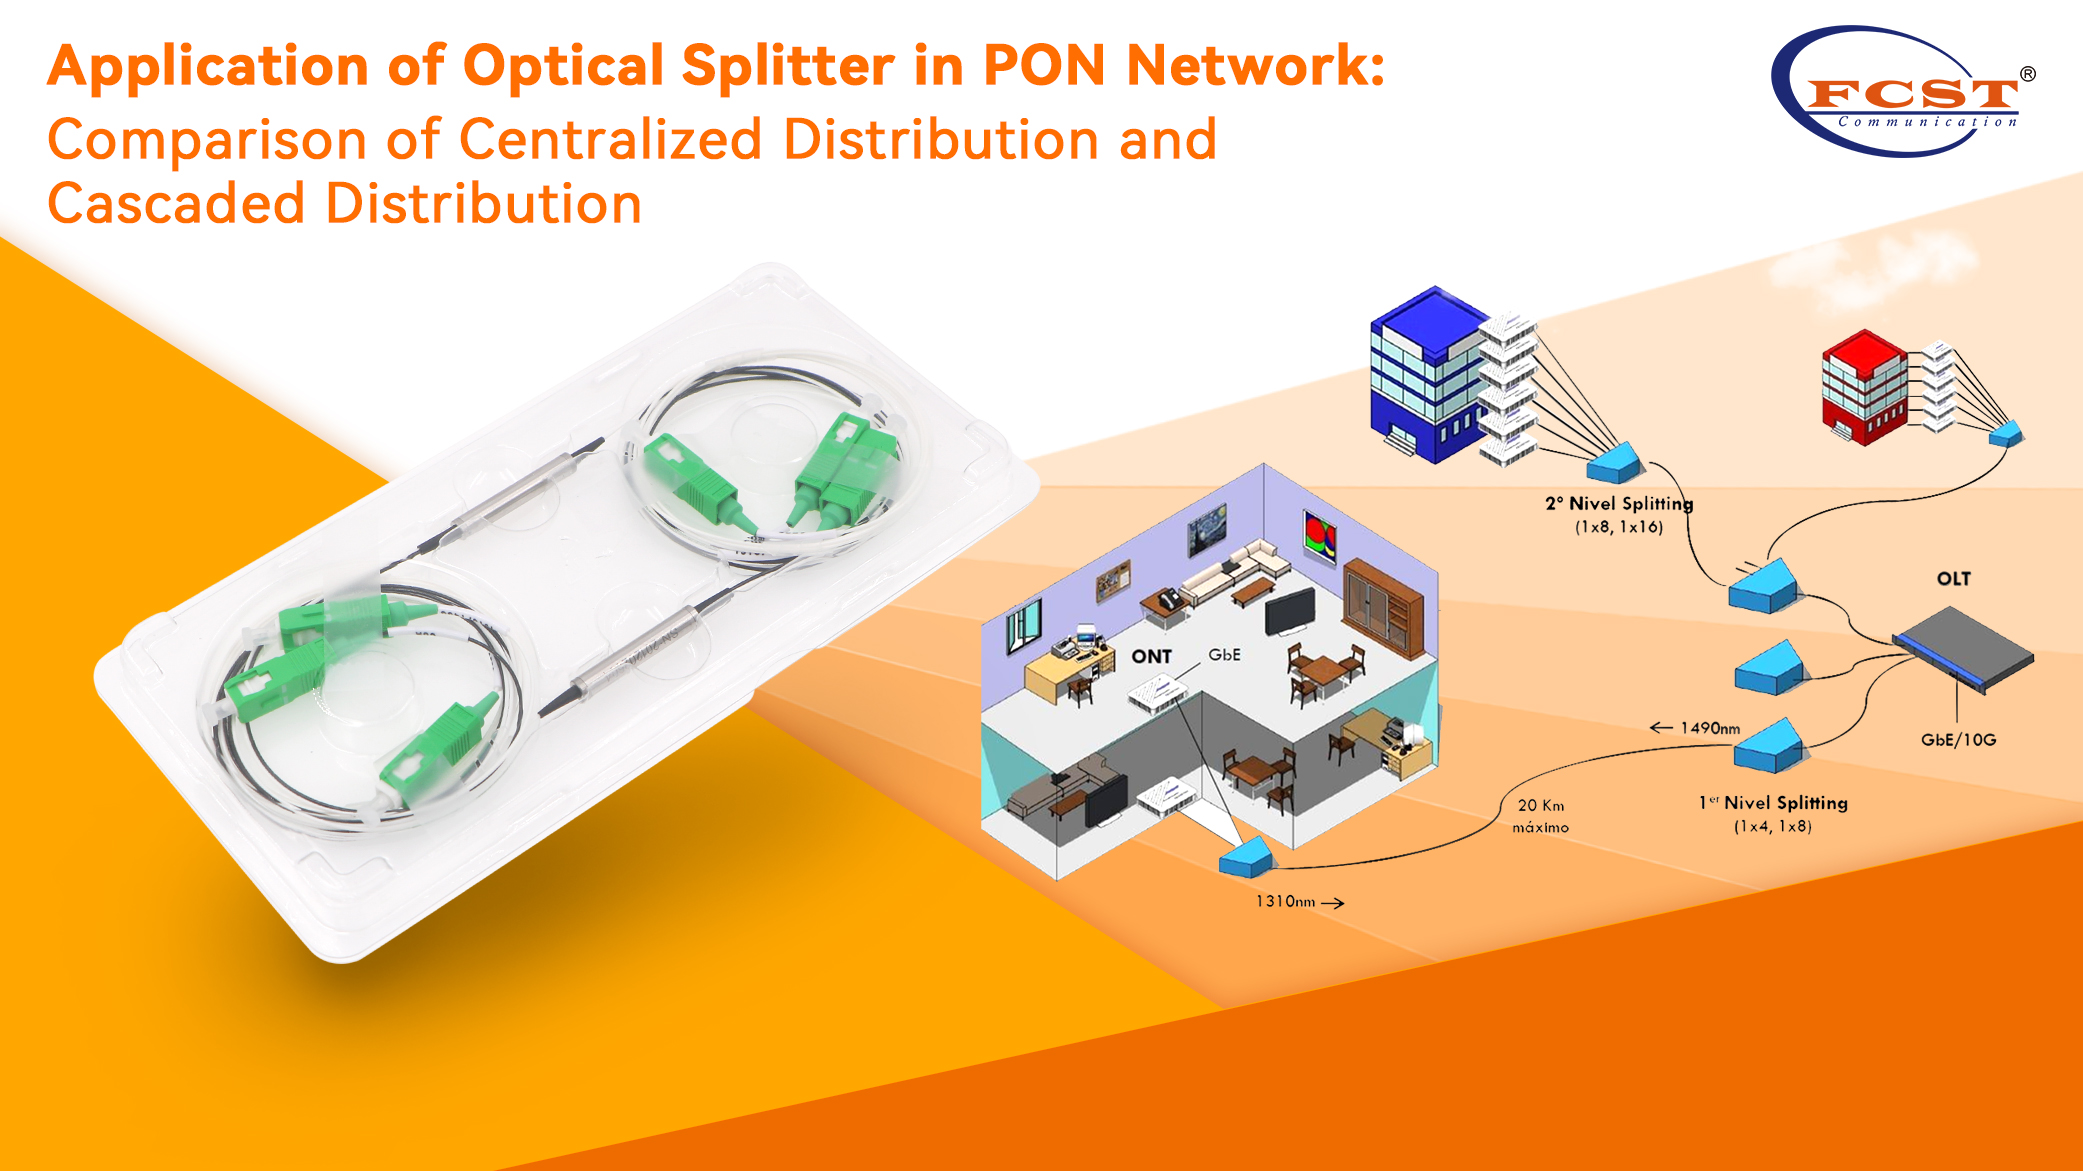 Application of Optical Splitter in PON Network: Comparison of Centralized Distribution and Cascaded Distribution